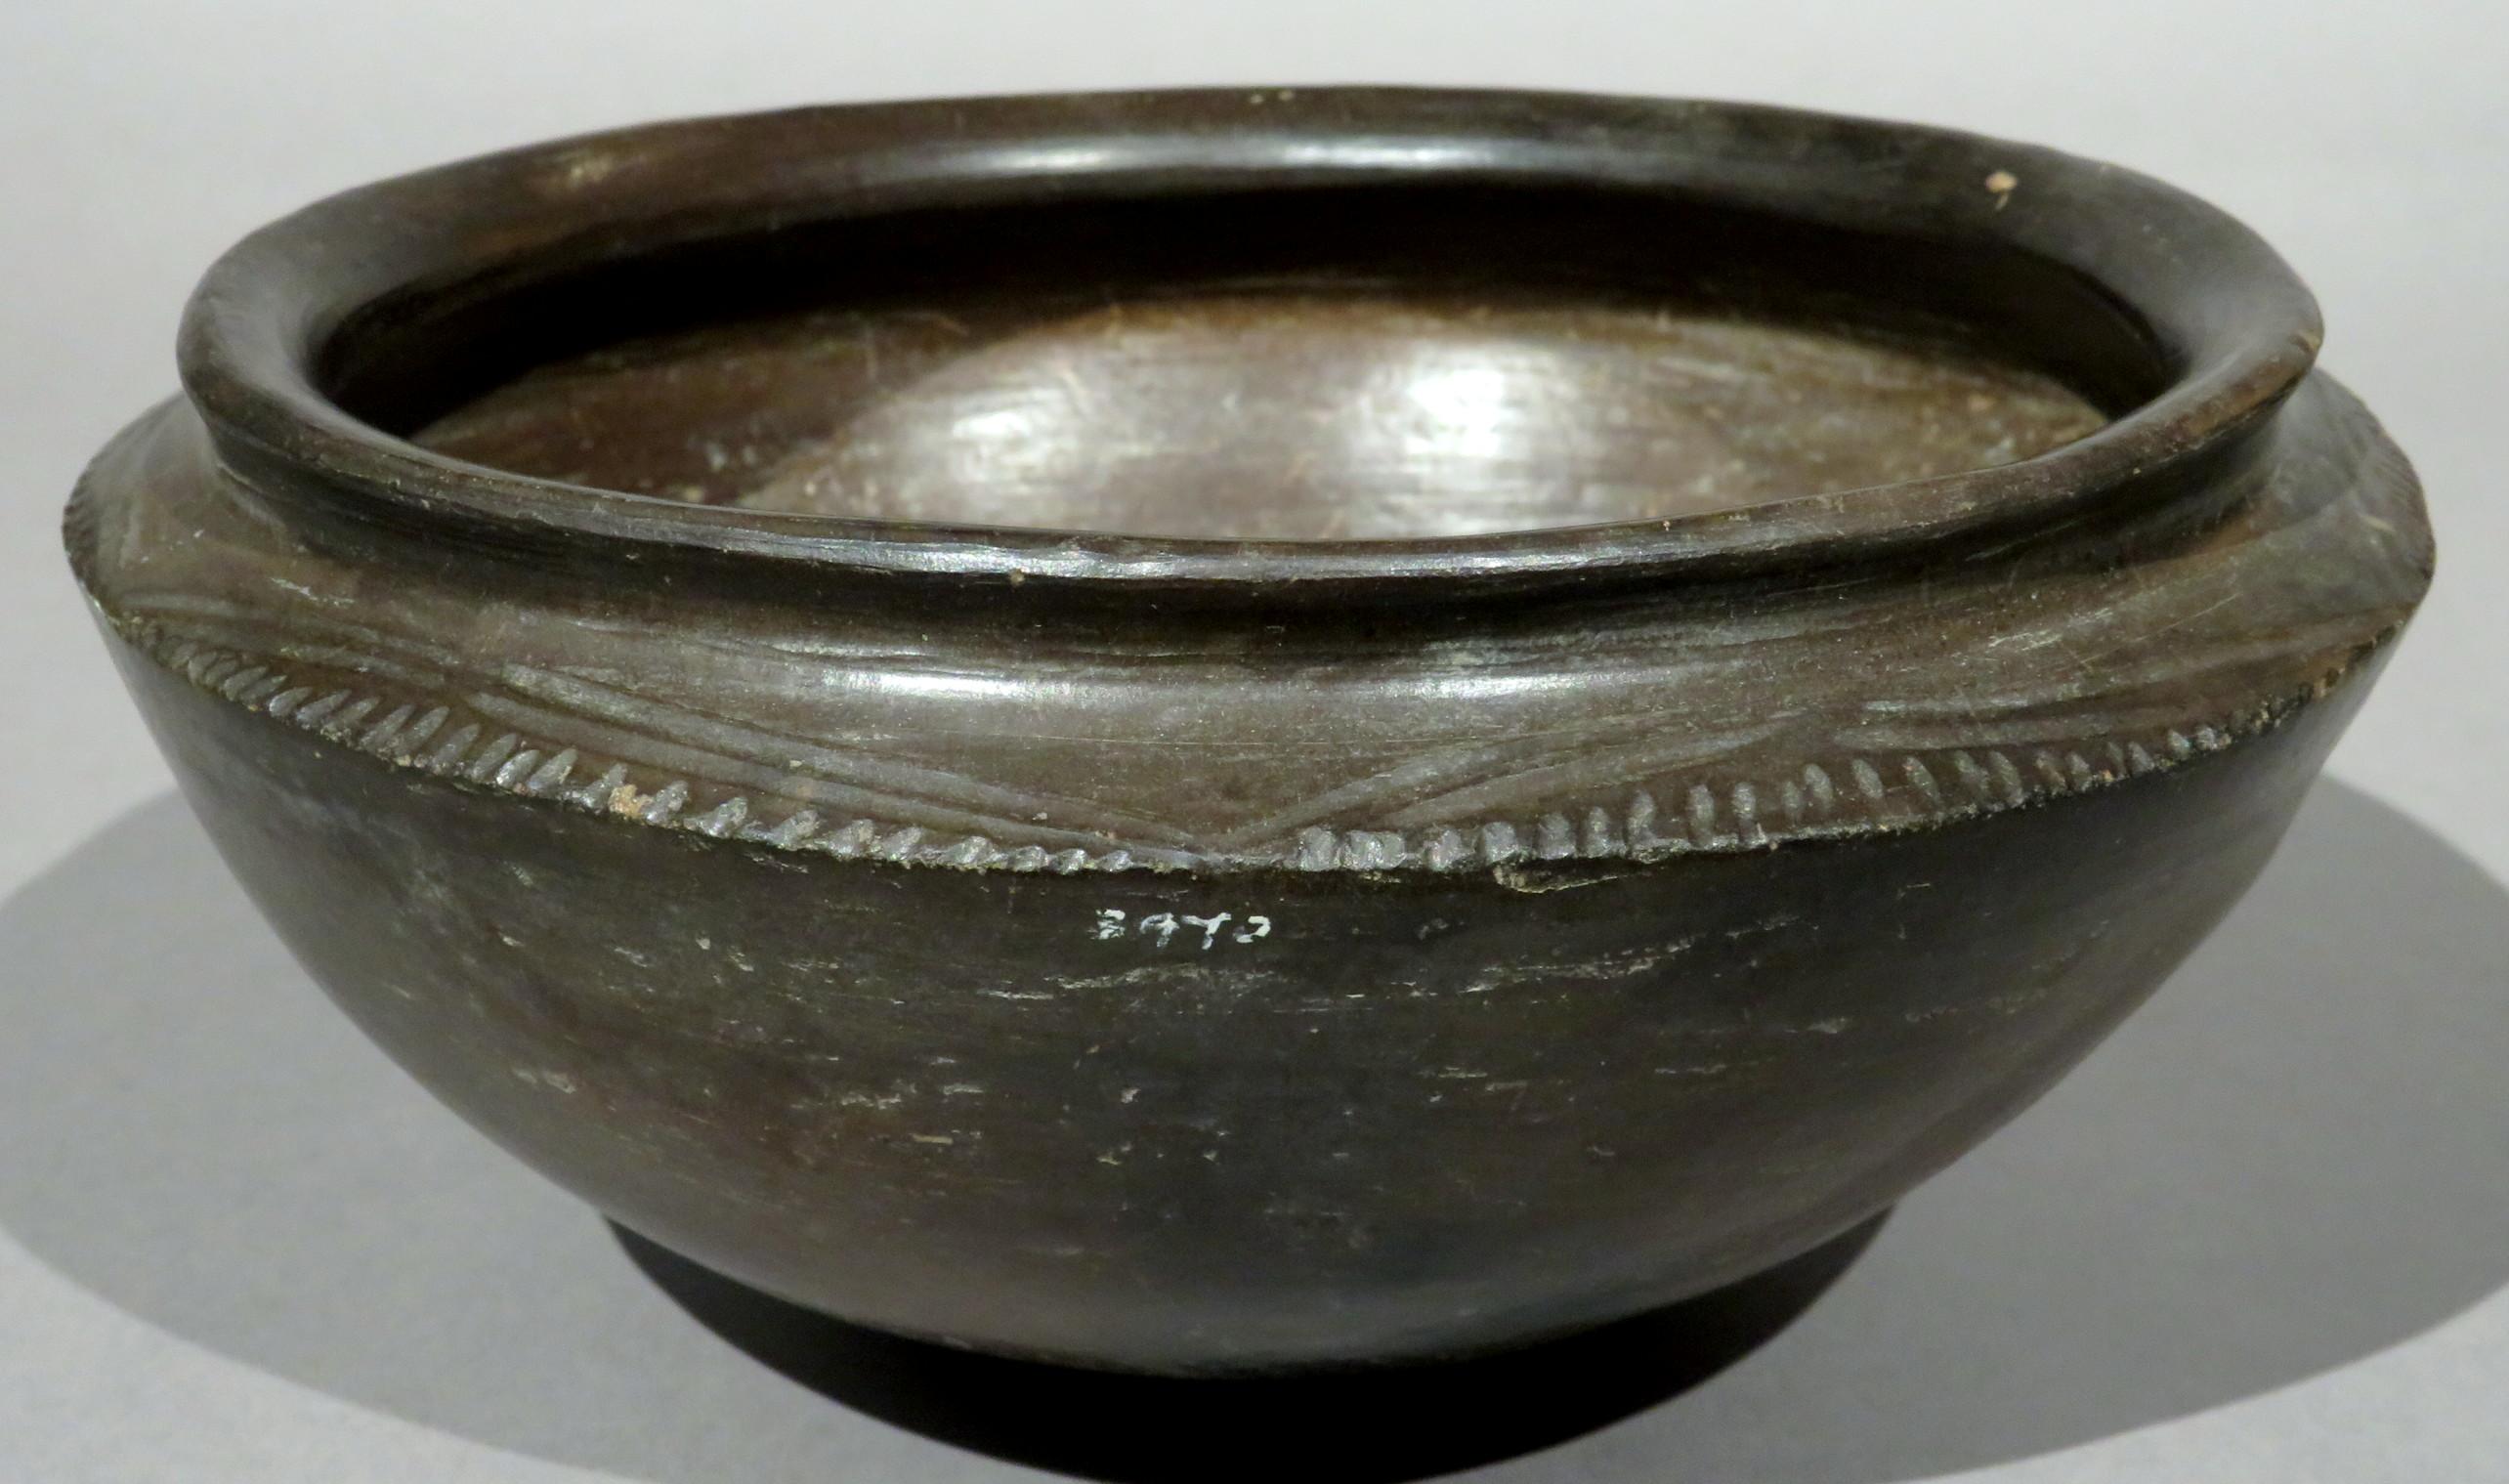 The dark brown earthenware bowl-shaped body rising to a flattened shoulder with incised linear & notched detail rising to a roll-over rim. The underside showing evidence of exposure to open flame. Bearing hand painted collection inventory numbers